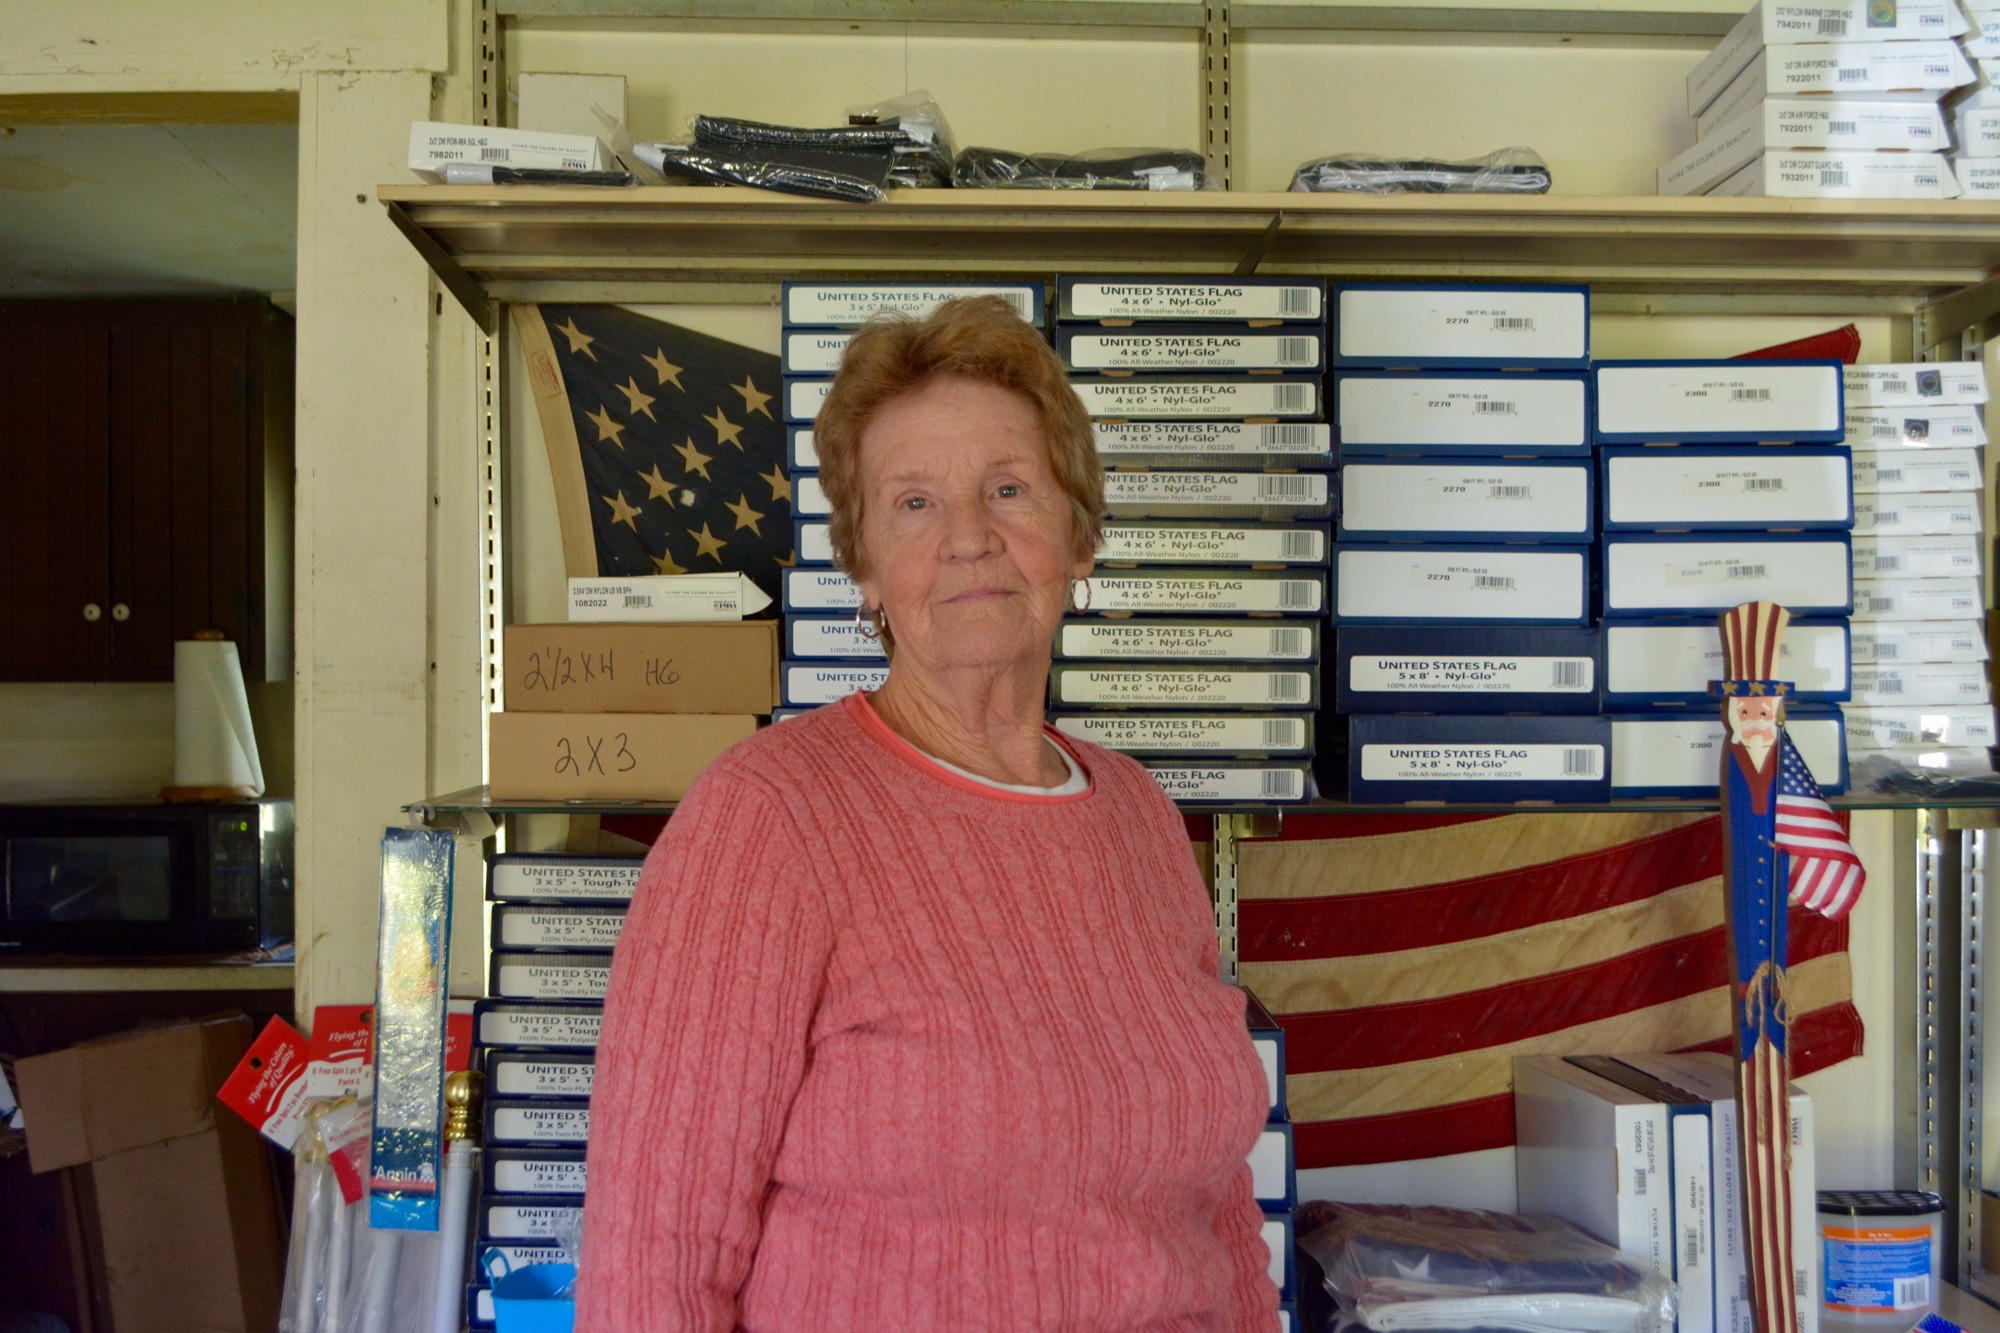 Dede Horne inherited the Flagman business from her brother, Ned Horne. She aims to keep the business running in his memory.